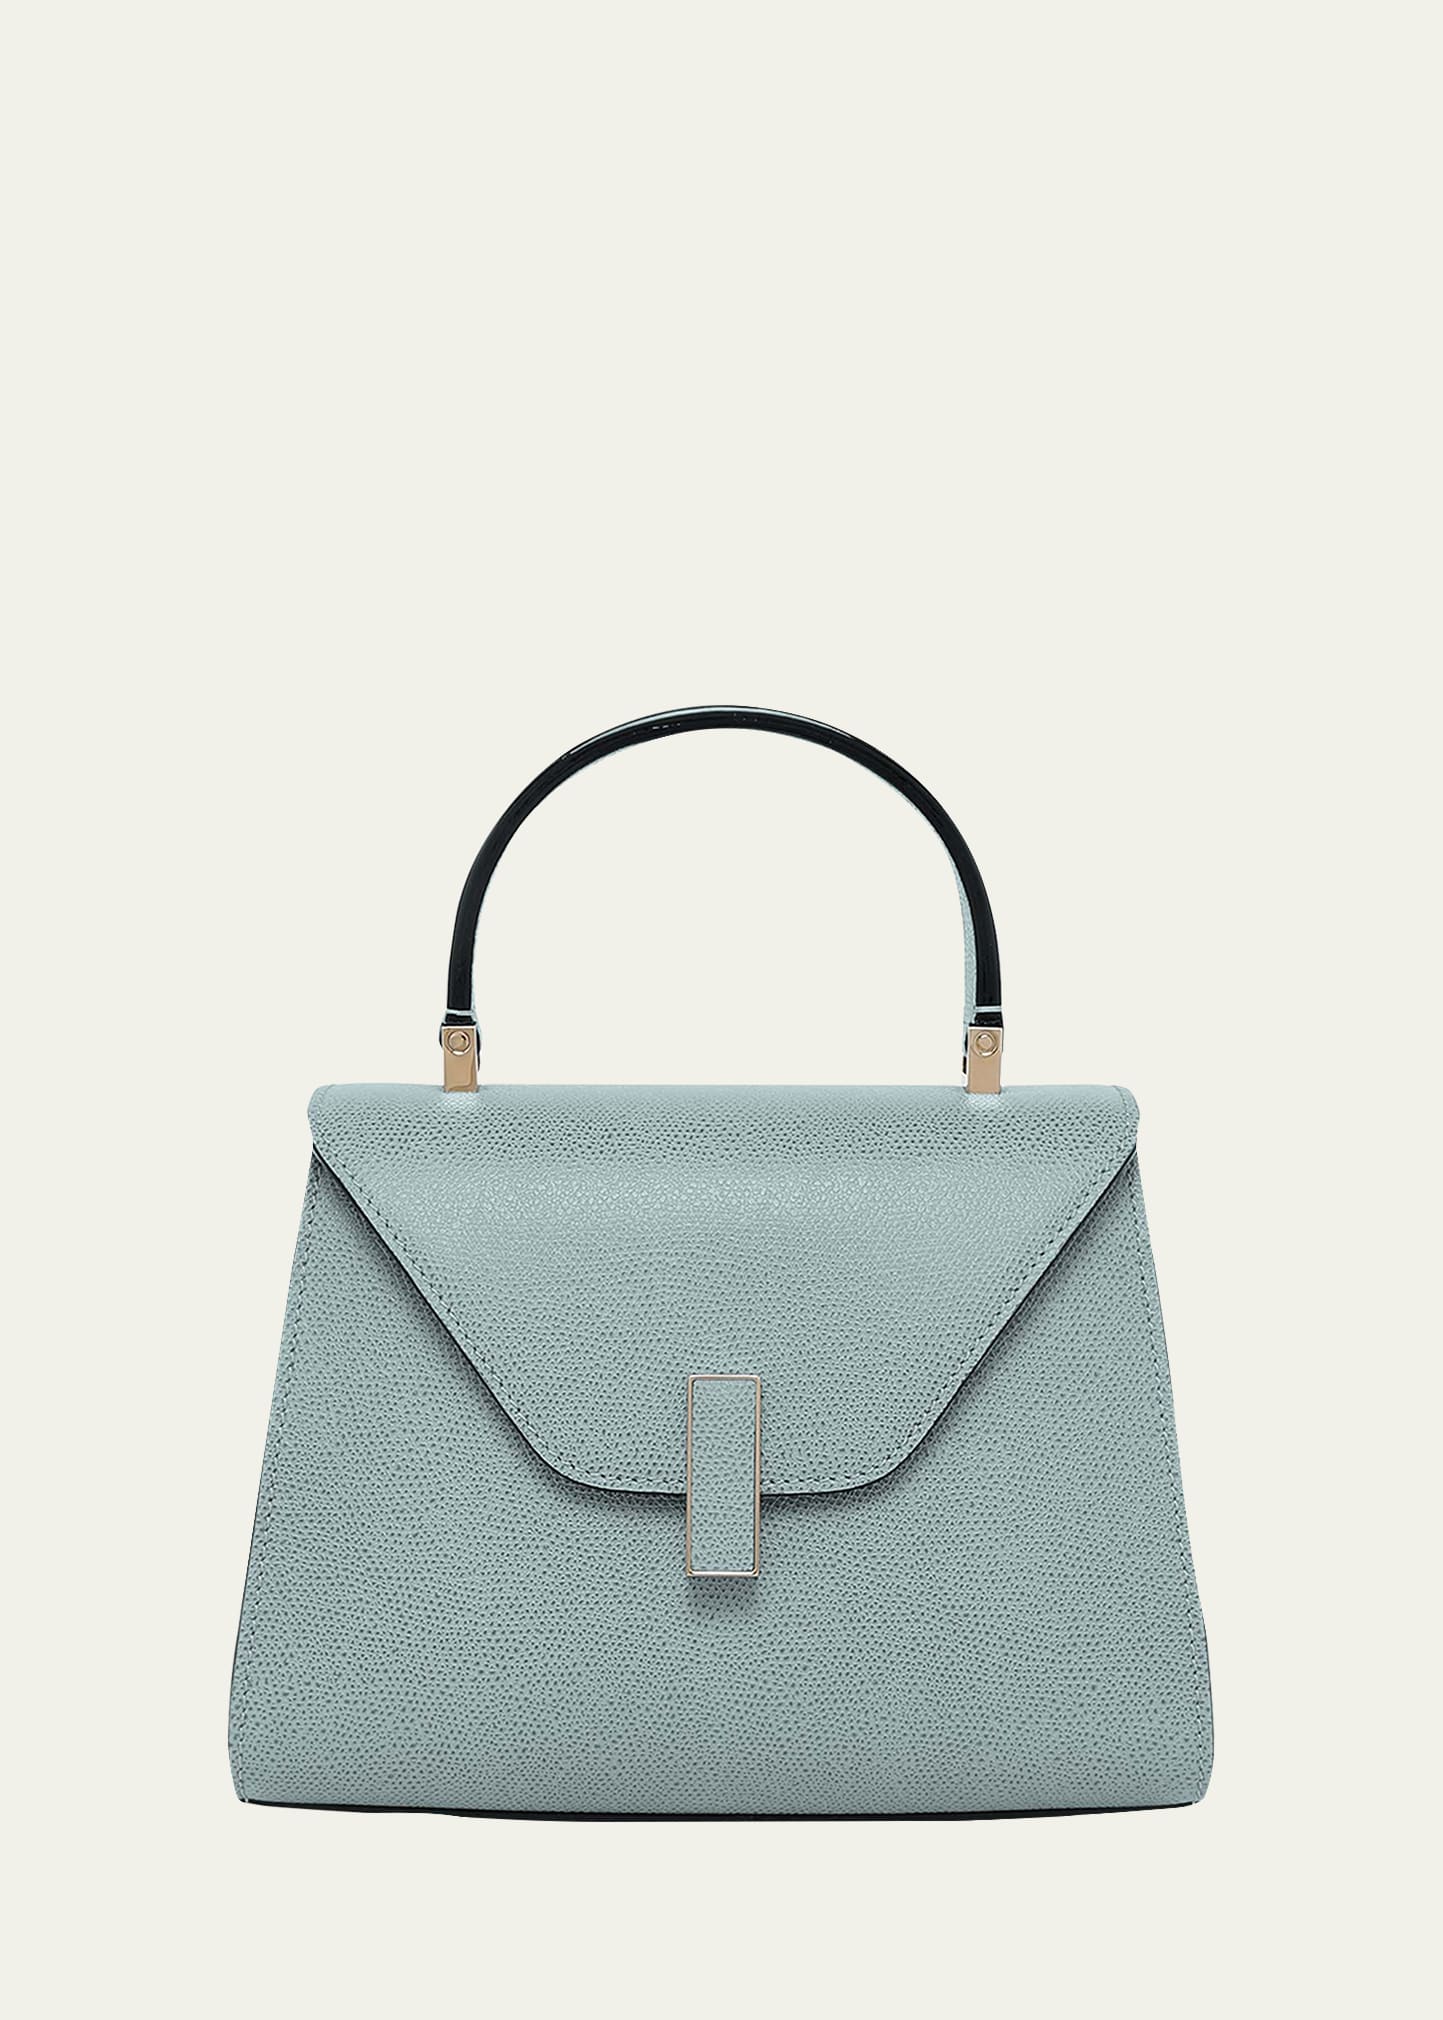 Valextra Iside Mini Tote Bag In Smokey Blue